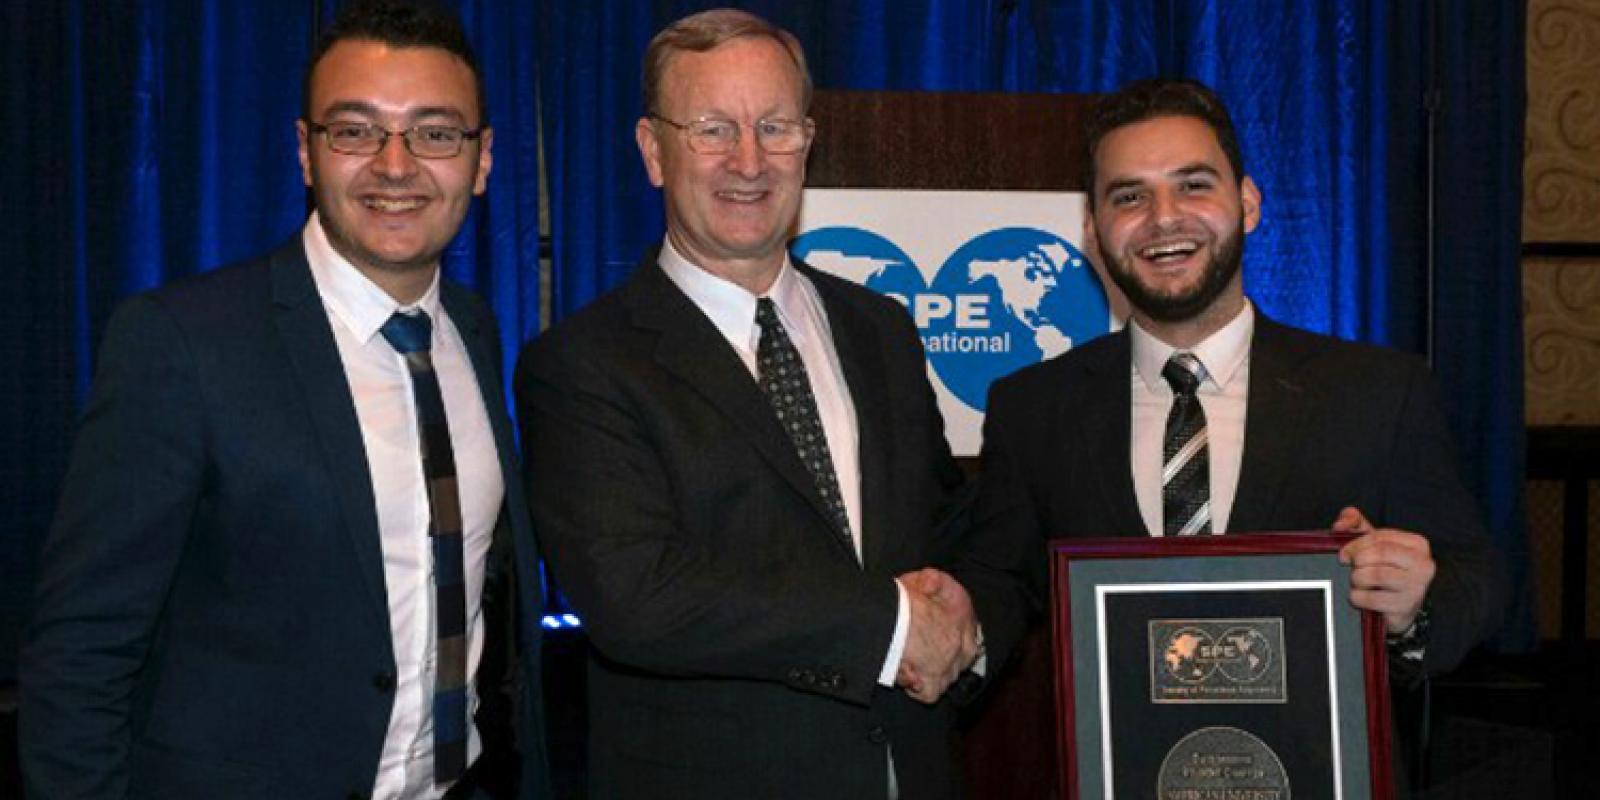  Mark Mohy, SPE International President Nathan Meehan and Omar Fathy at the Student Awards Luncheon